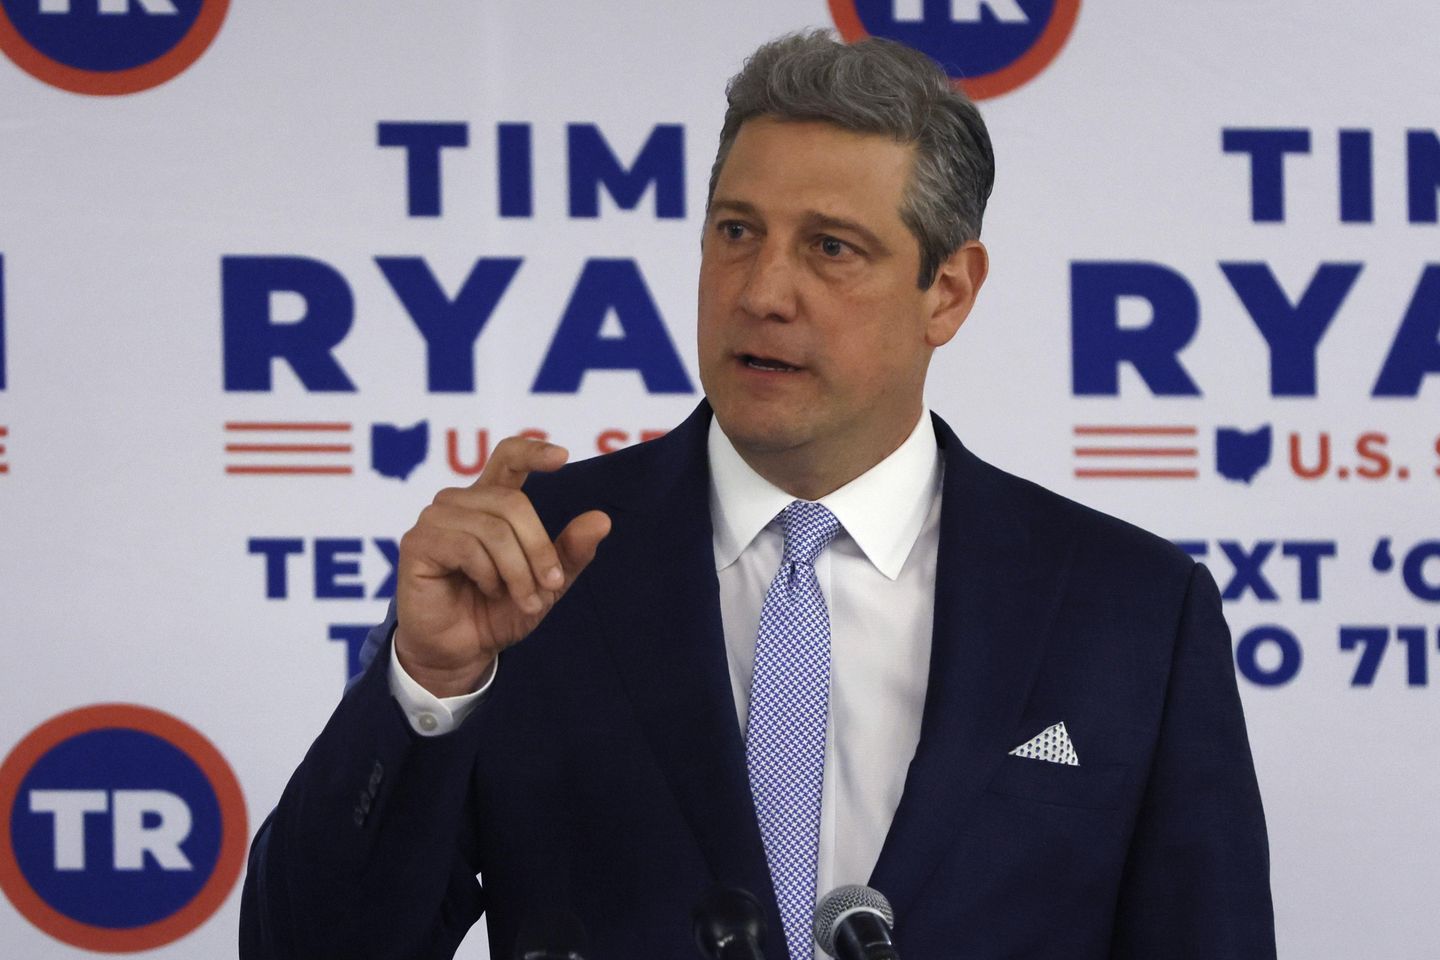 Tim Ryan: Student loan forgiveness 'sends the wrong message,' does 'nothing to control' costs